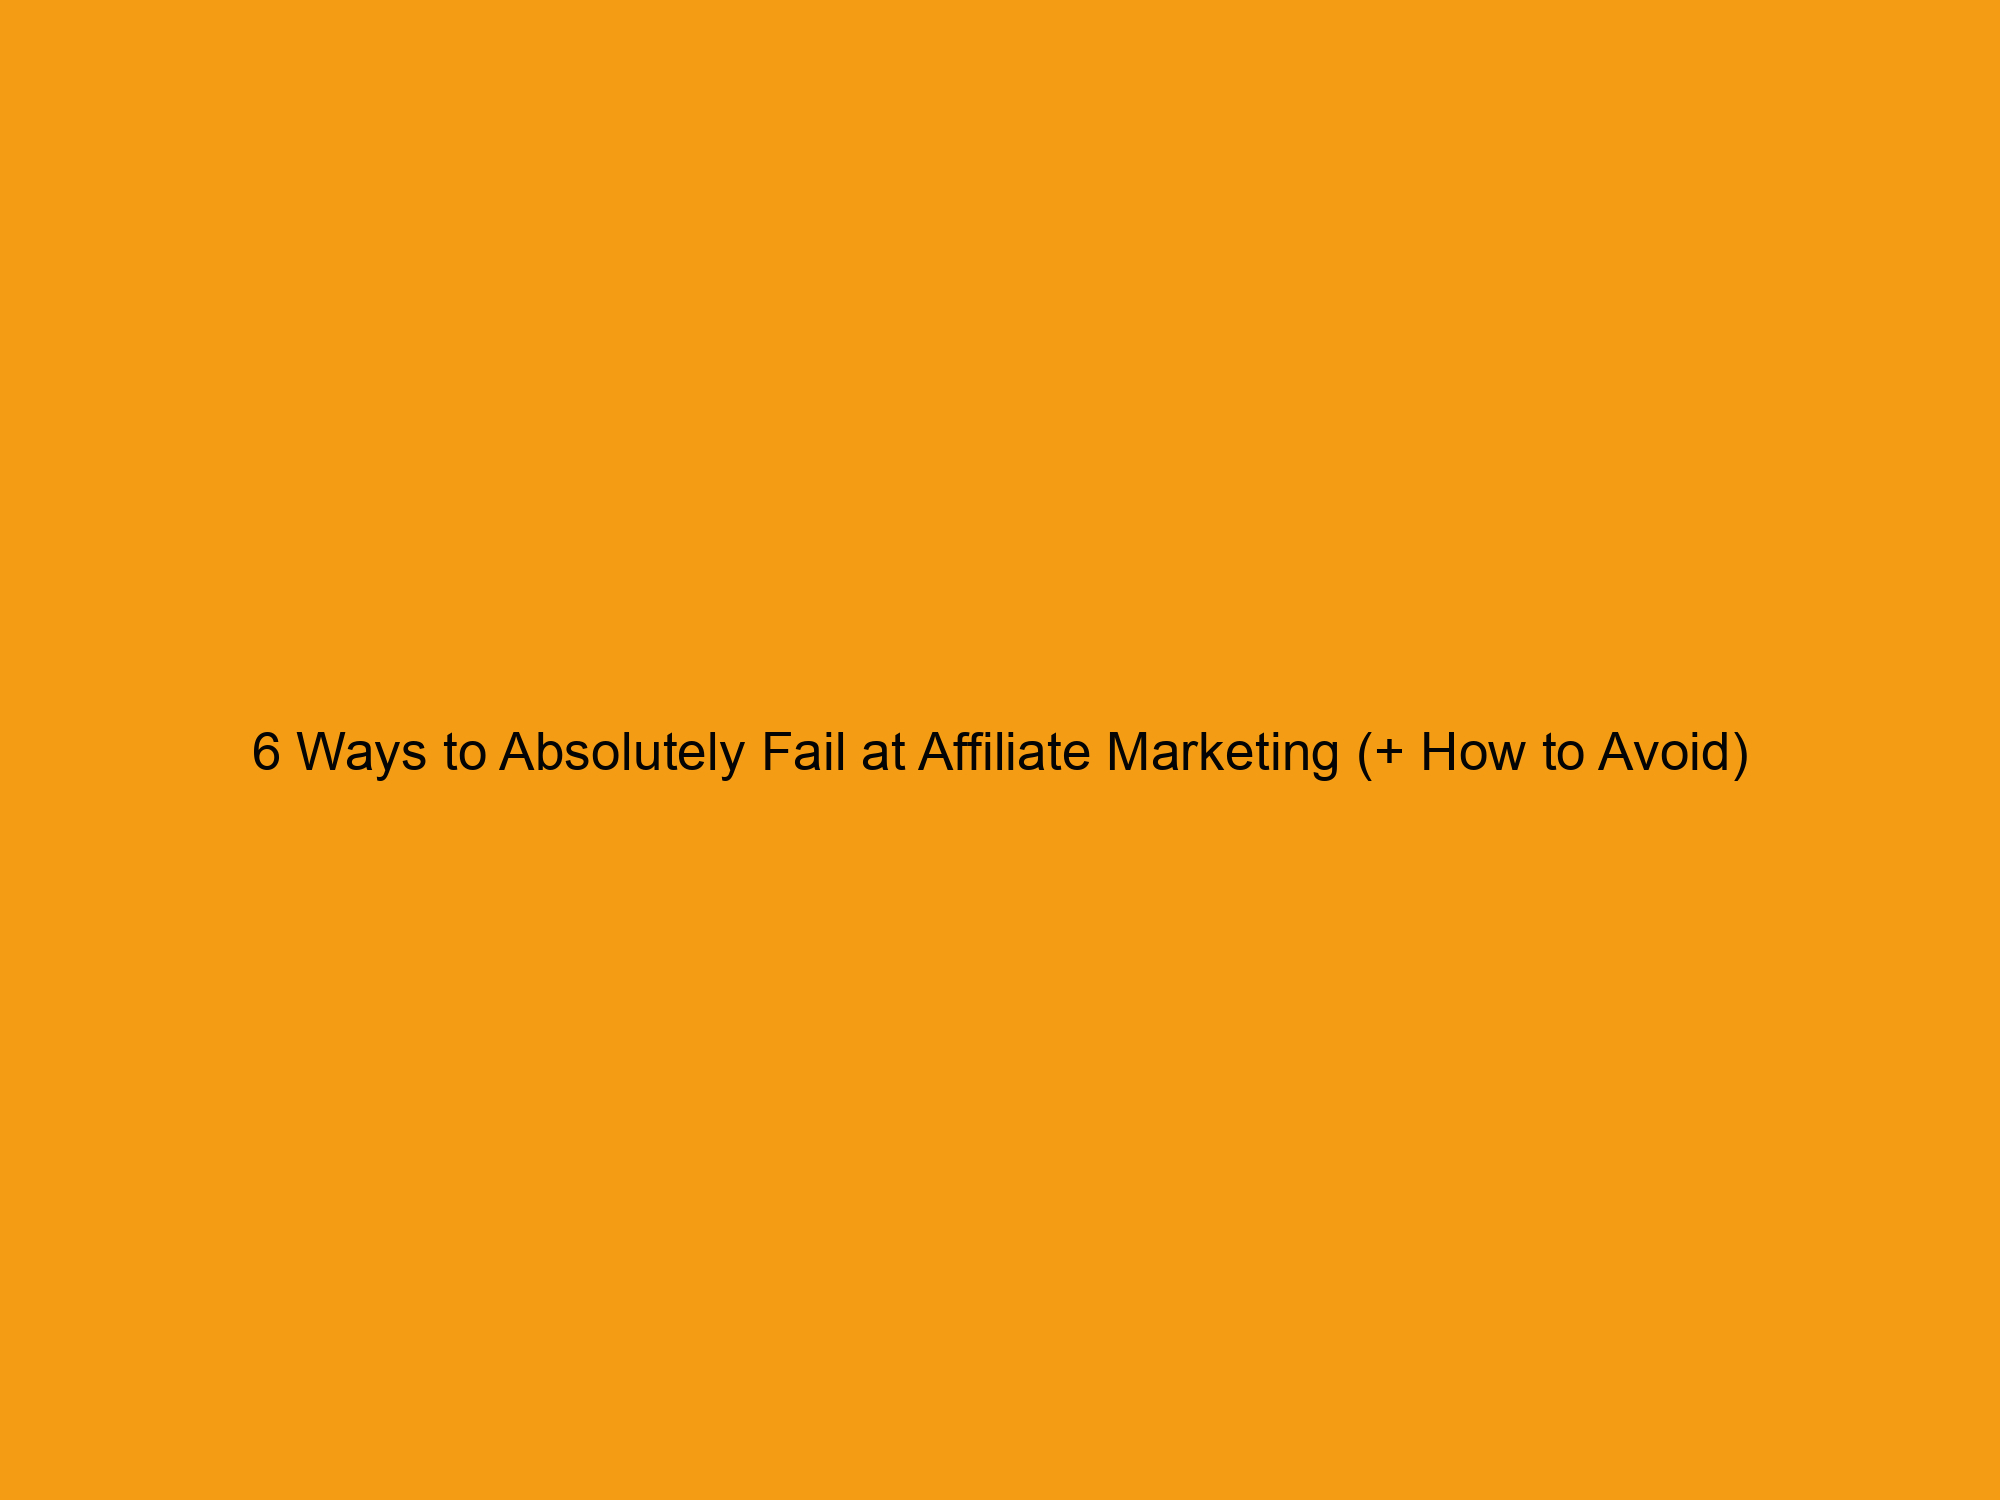 6 Ways to Absolutely Fail at Affiliate Marketing (+ How to Avoid)